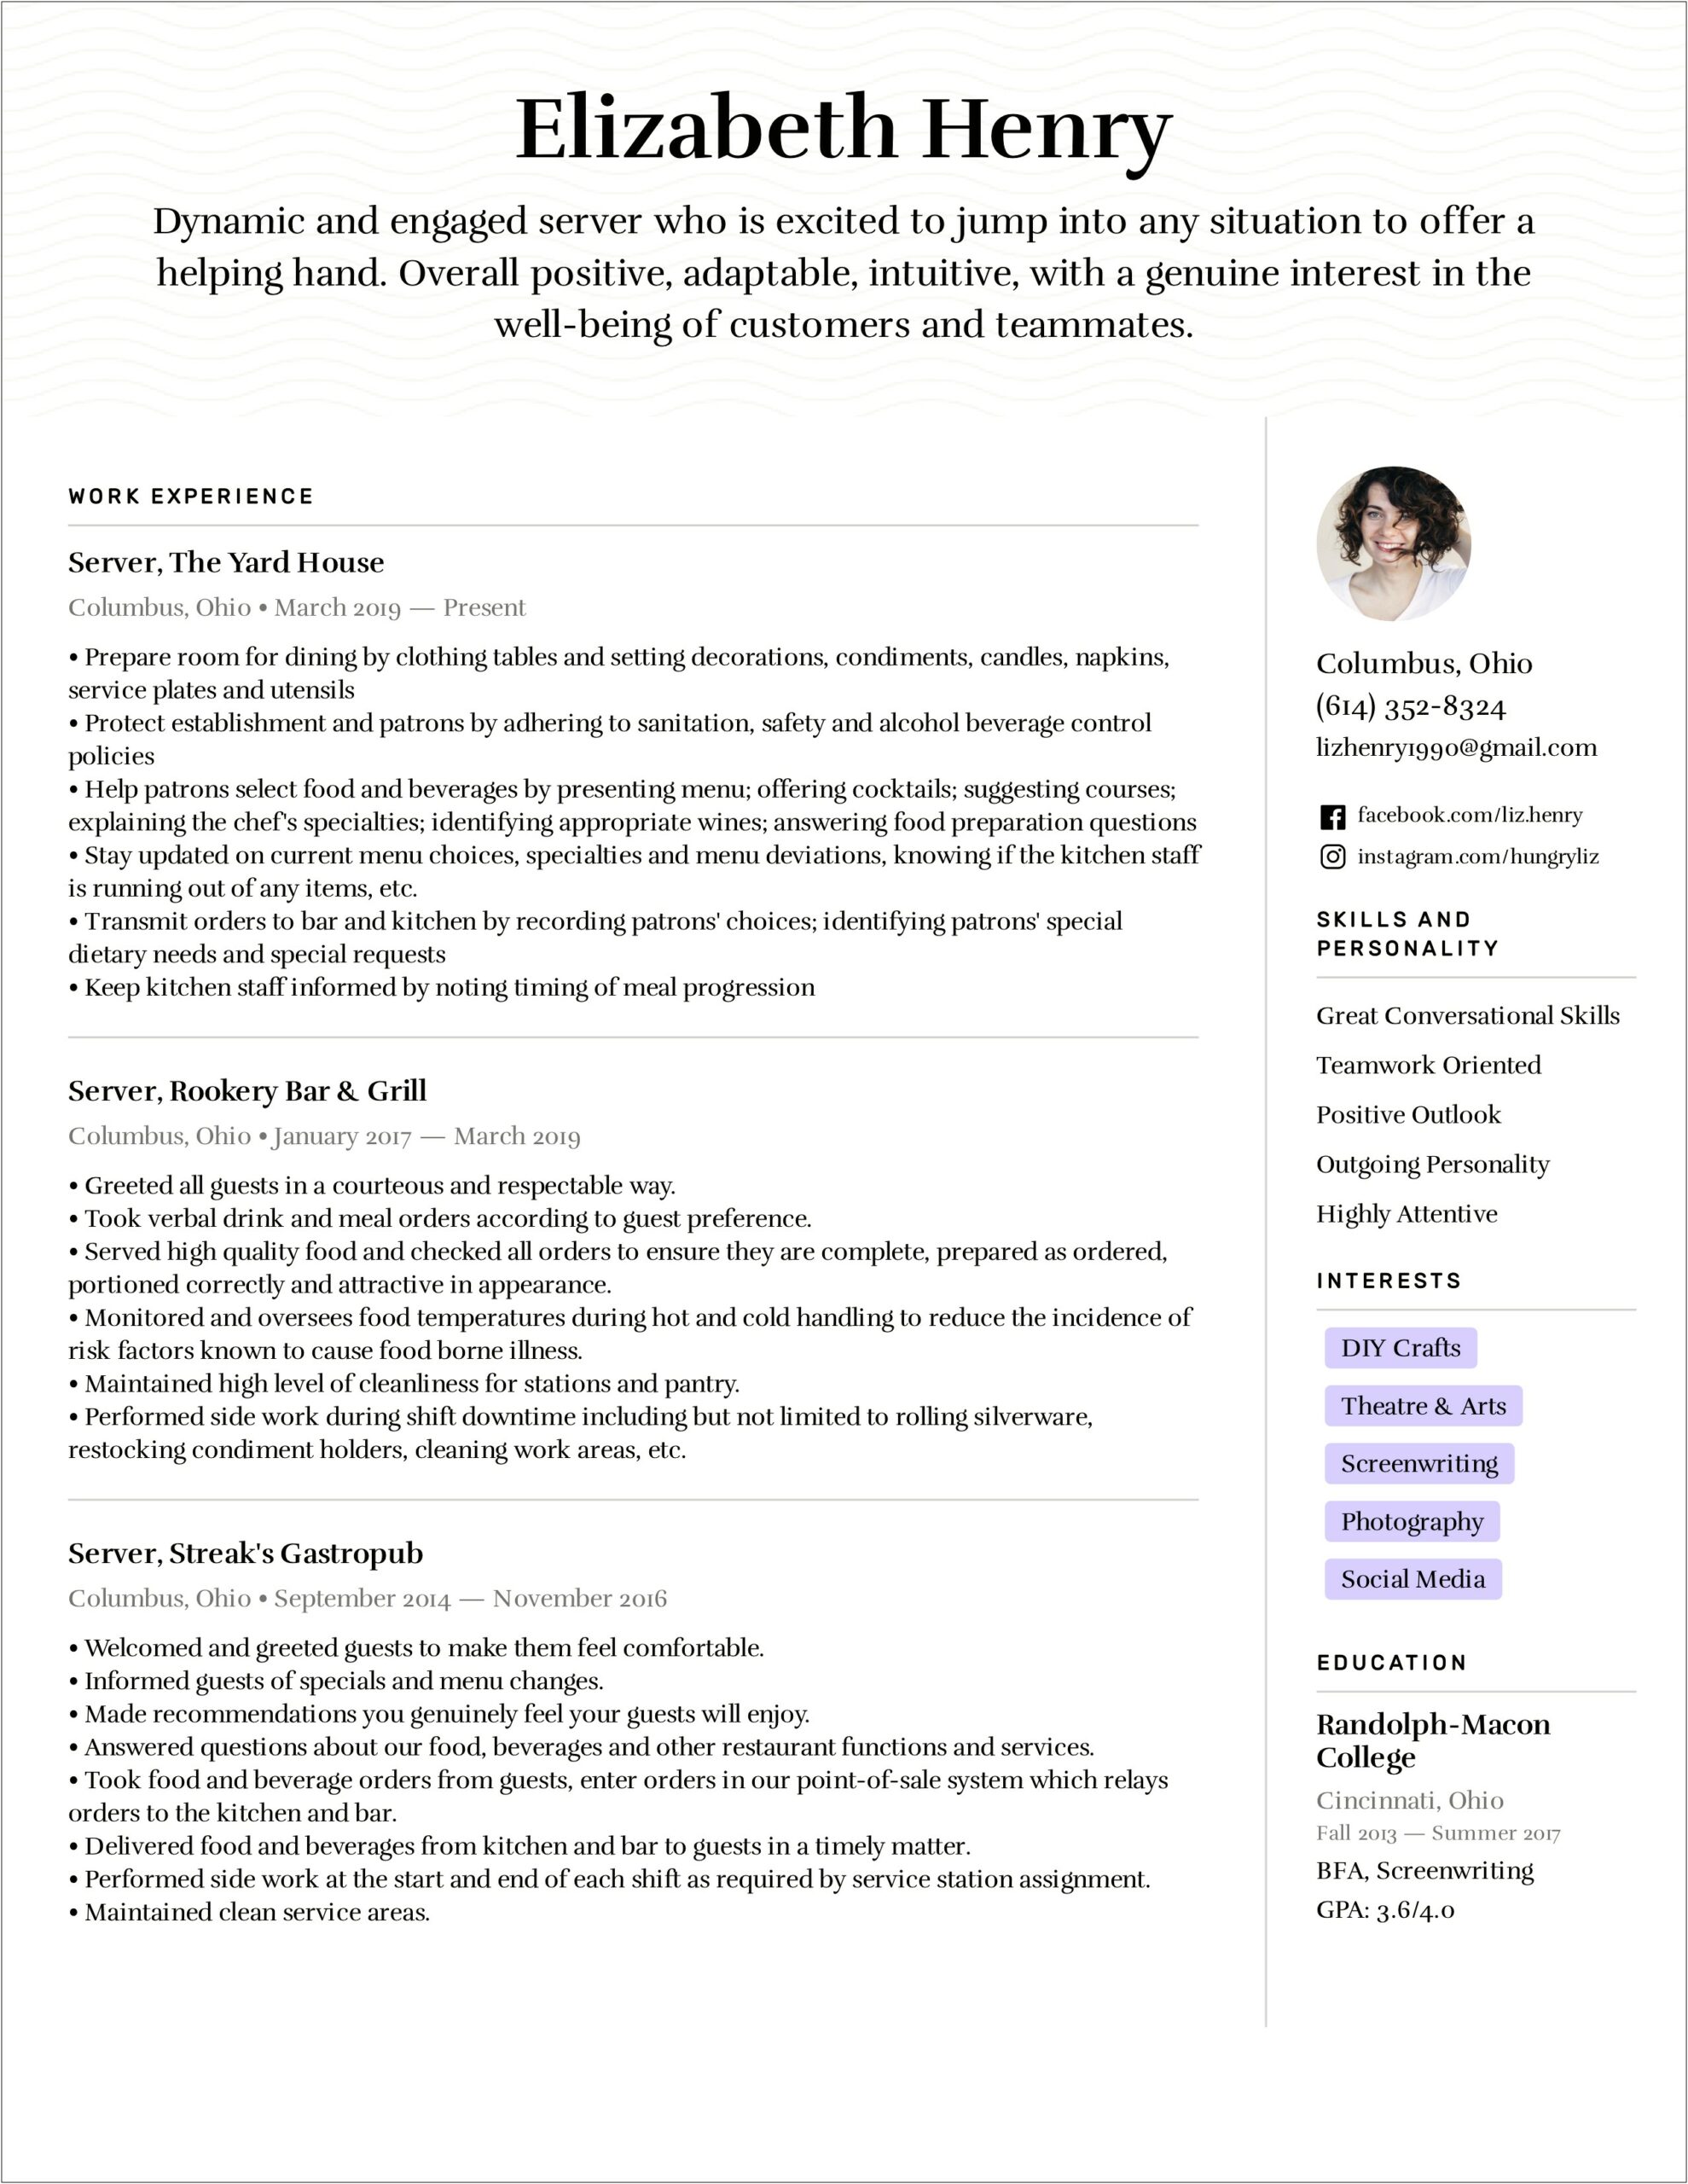 Example Of Adaptable Skill In Writing Resume